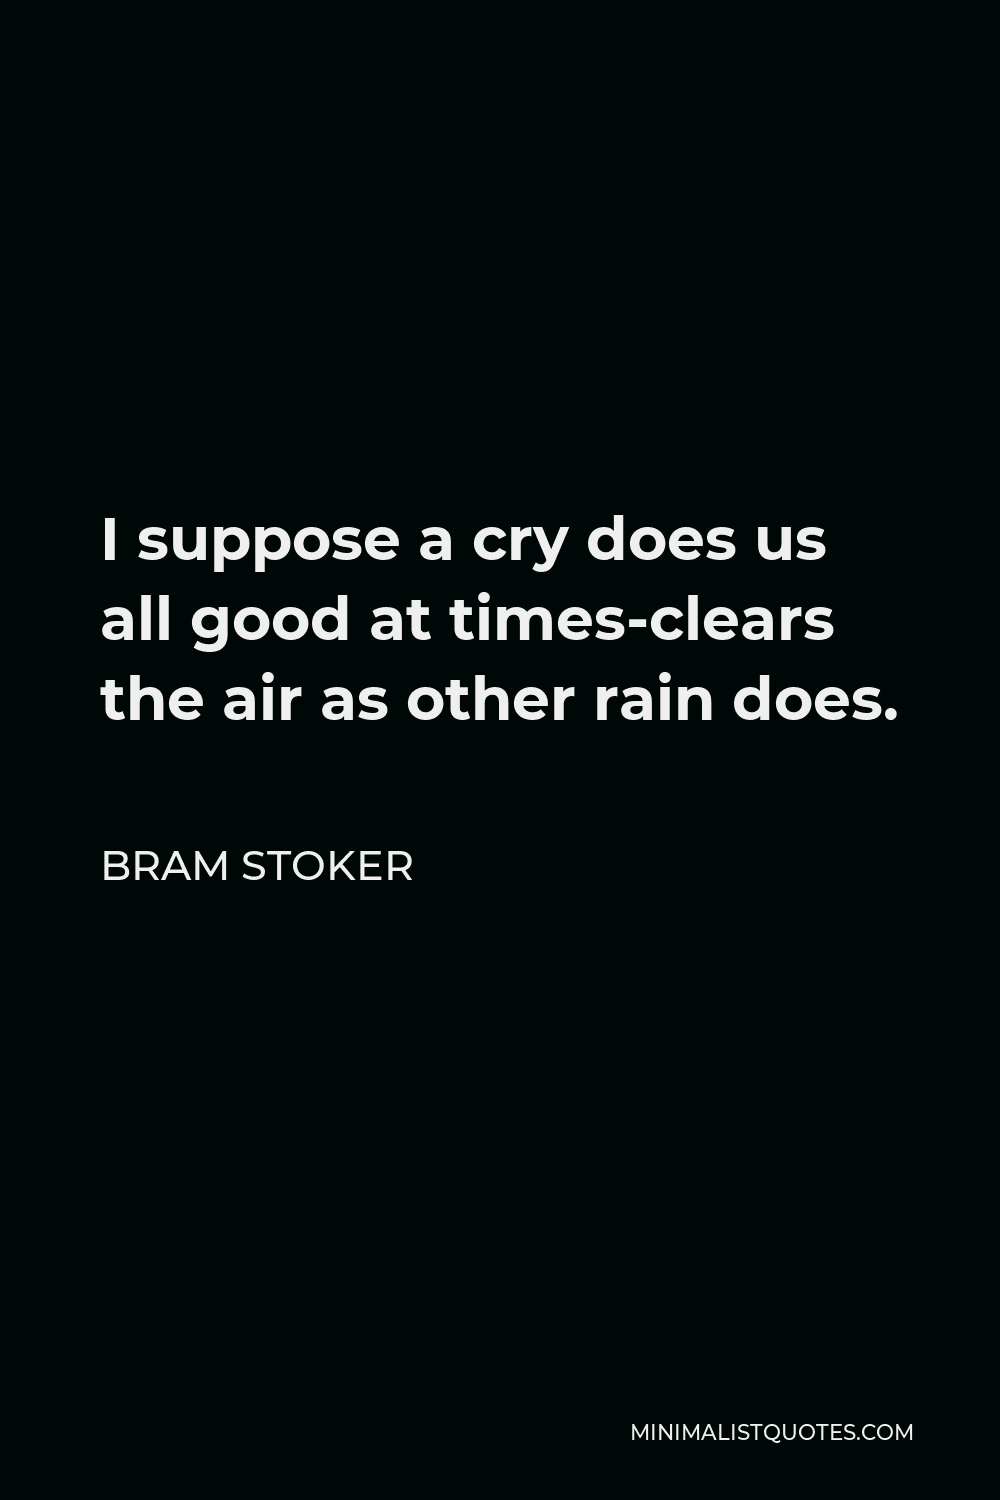 Bram Stoker Quote - I suppose a cry does us all good at times-clears the air as other rain does.